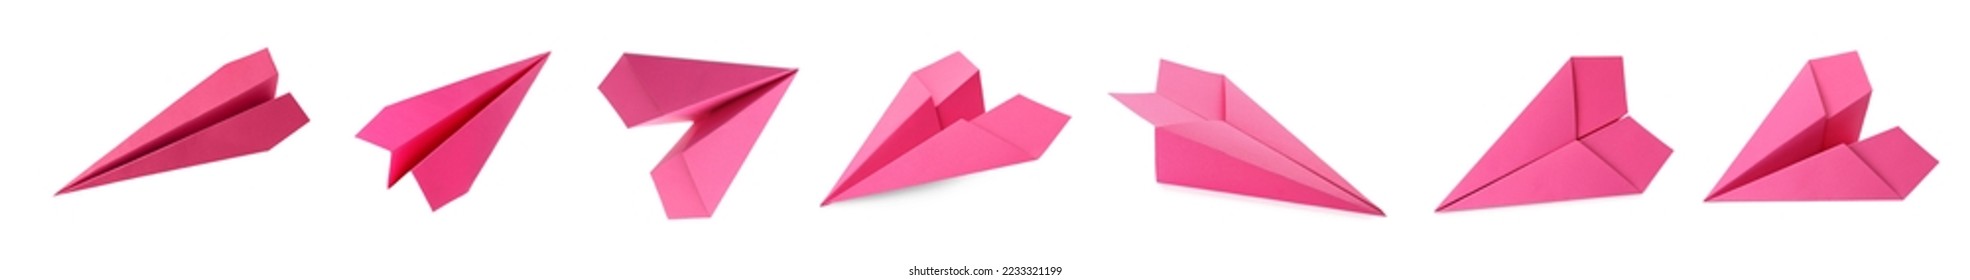 Set with handmade pink paper planes on white background